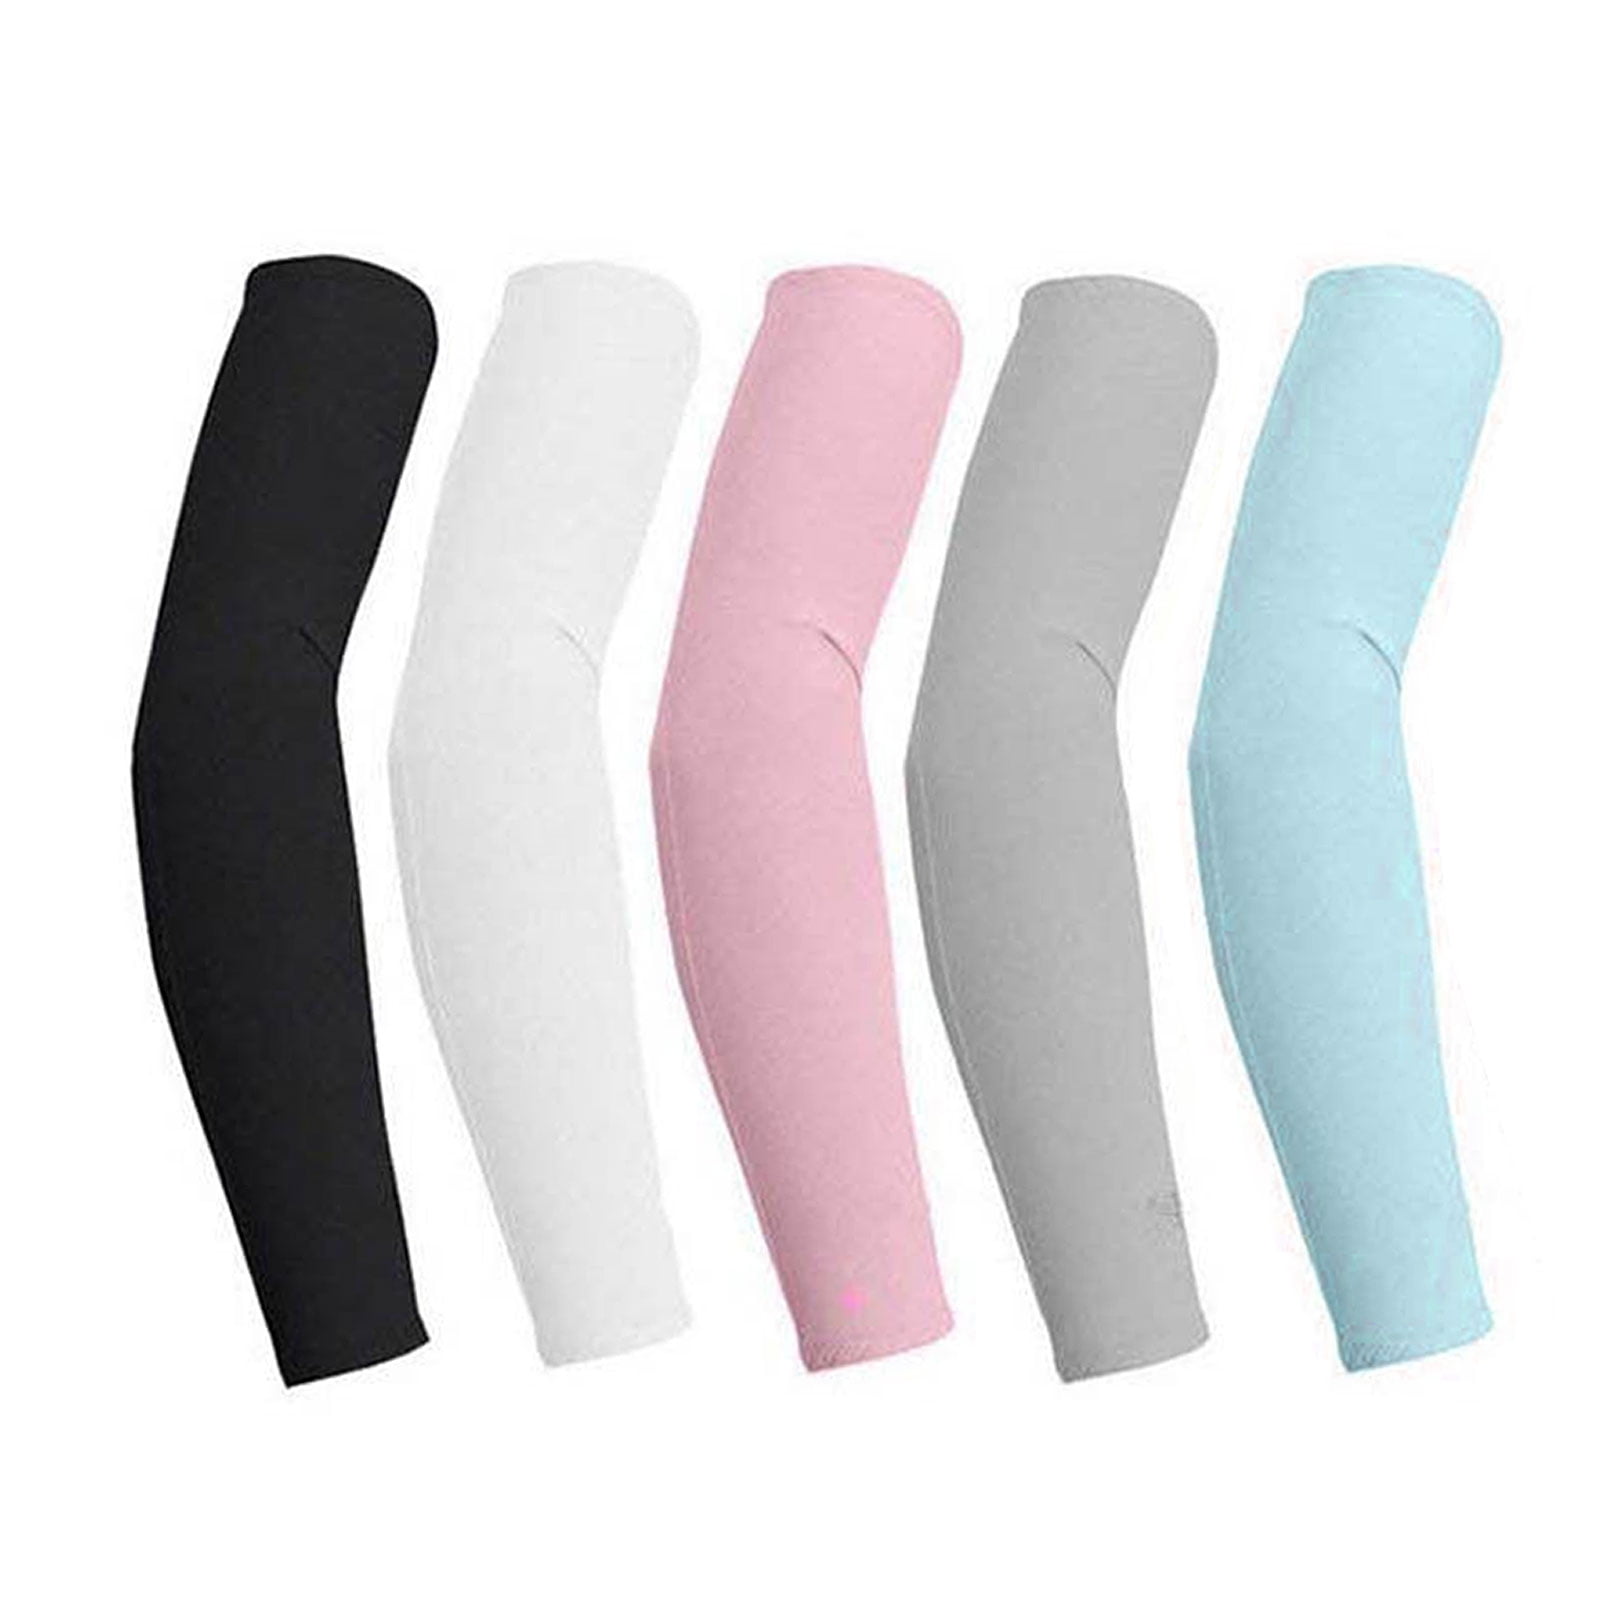 Arm Sleeves Sun Protection Accessory Ladies Outdoor Arm Cover Protector